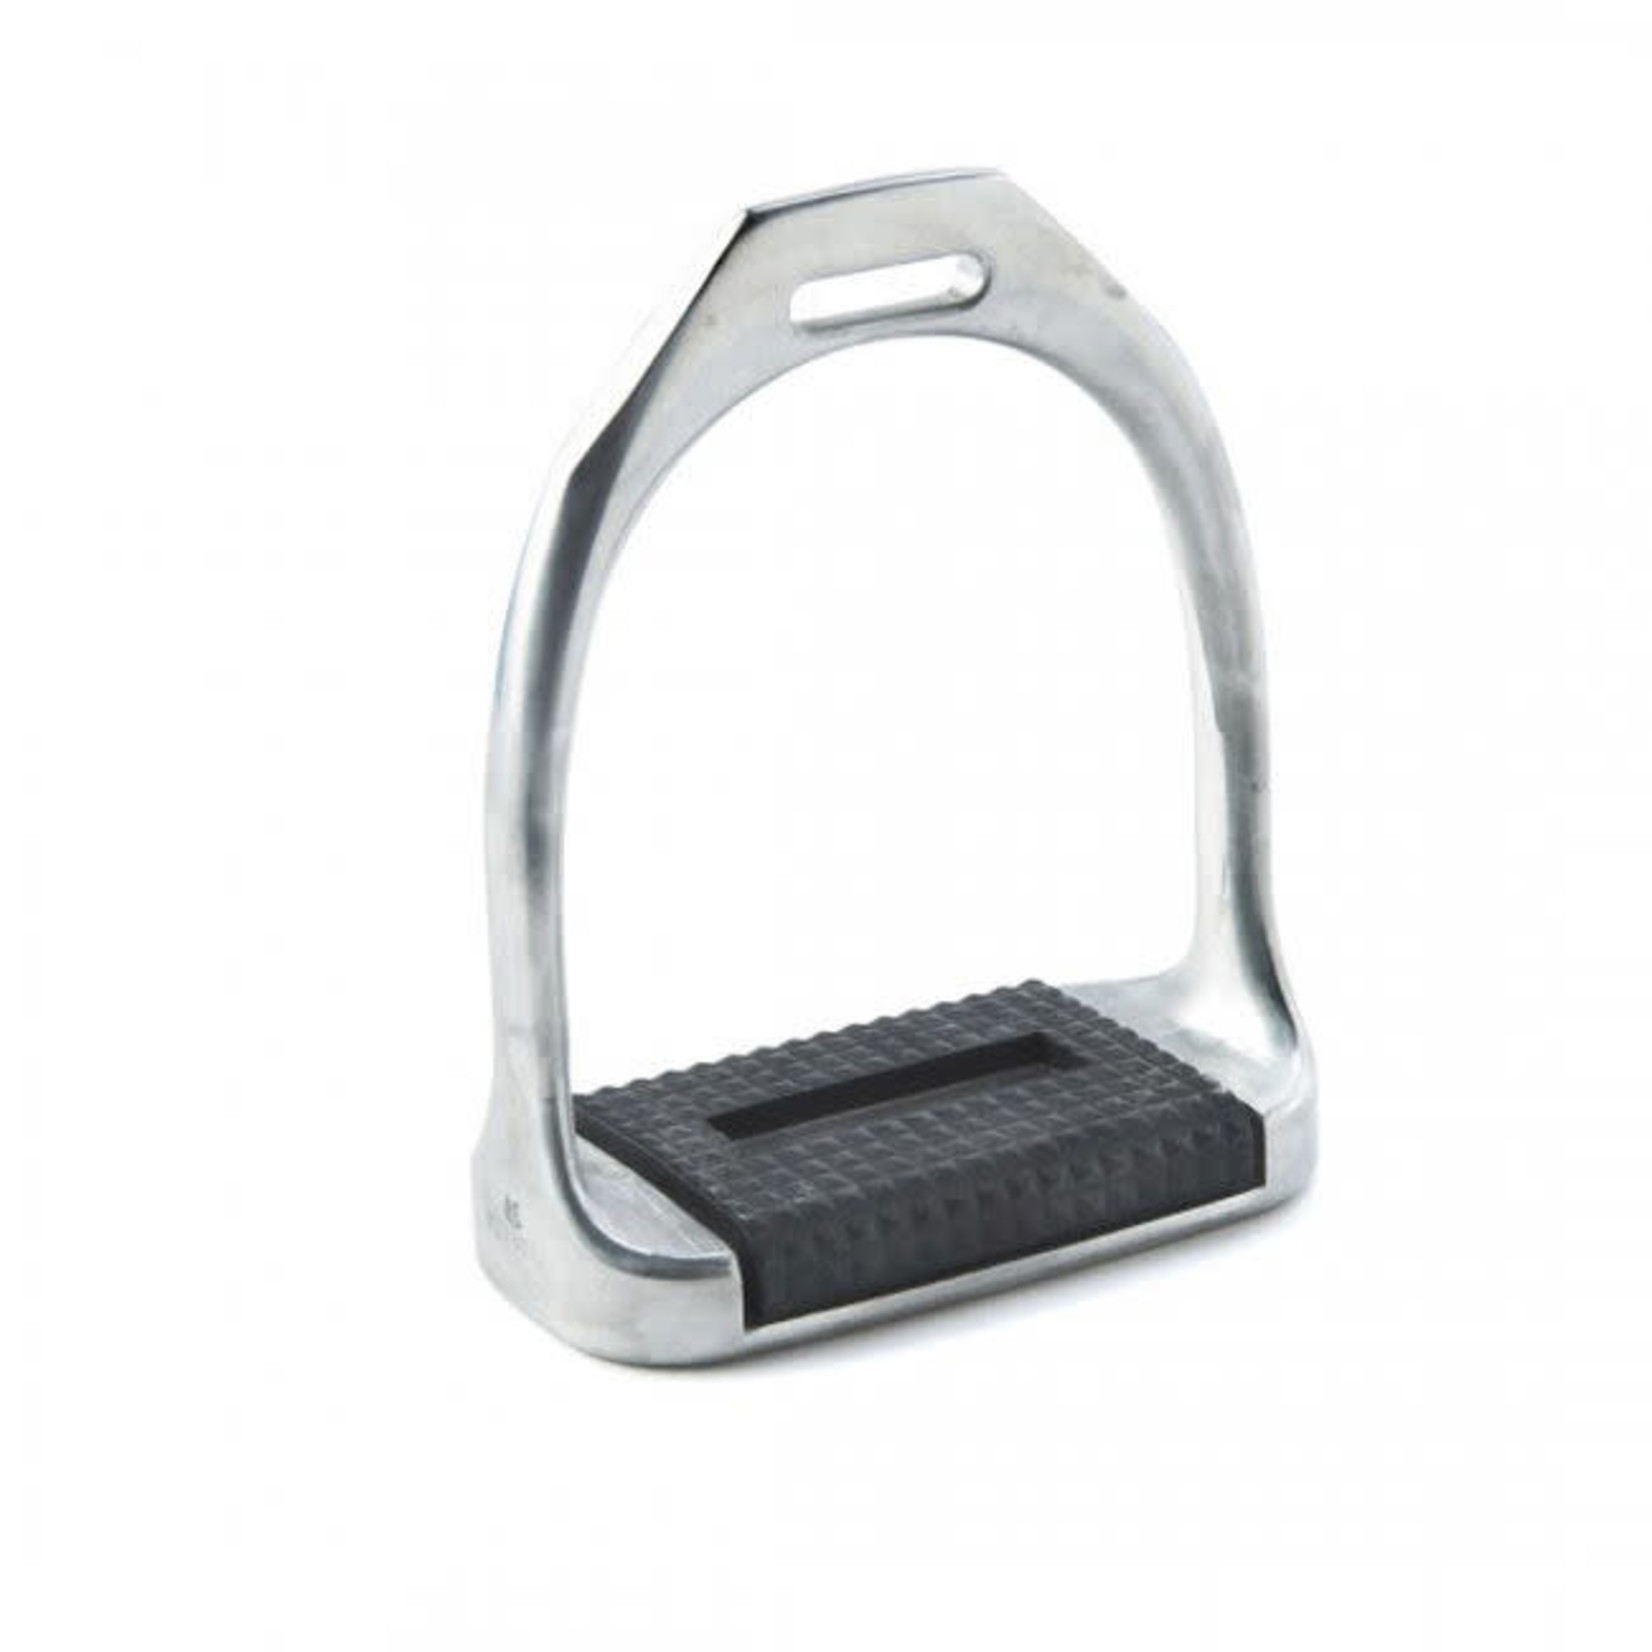 Equiwing Aluminum Stirrups with Pads